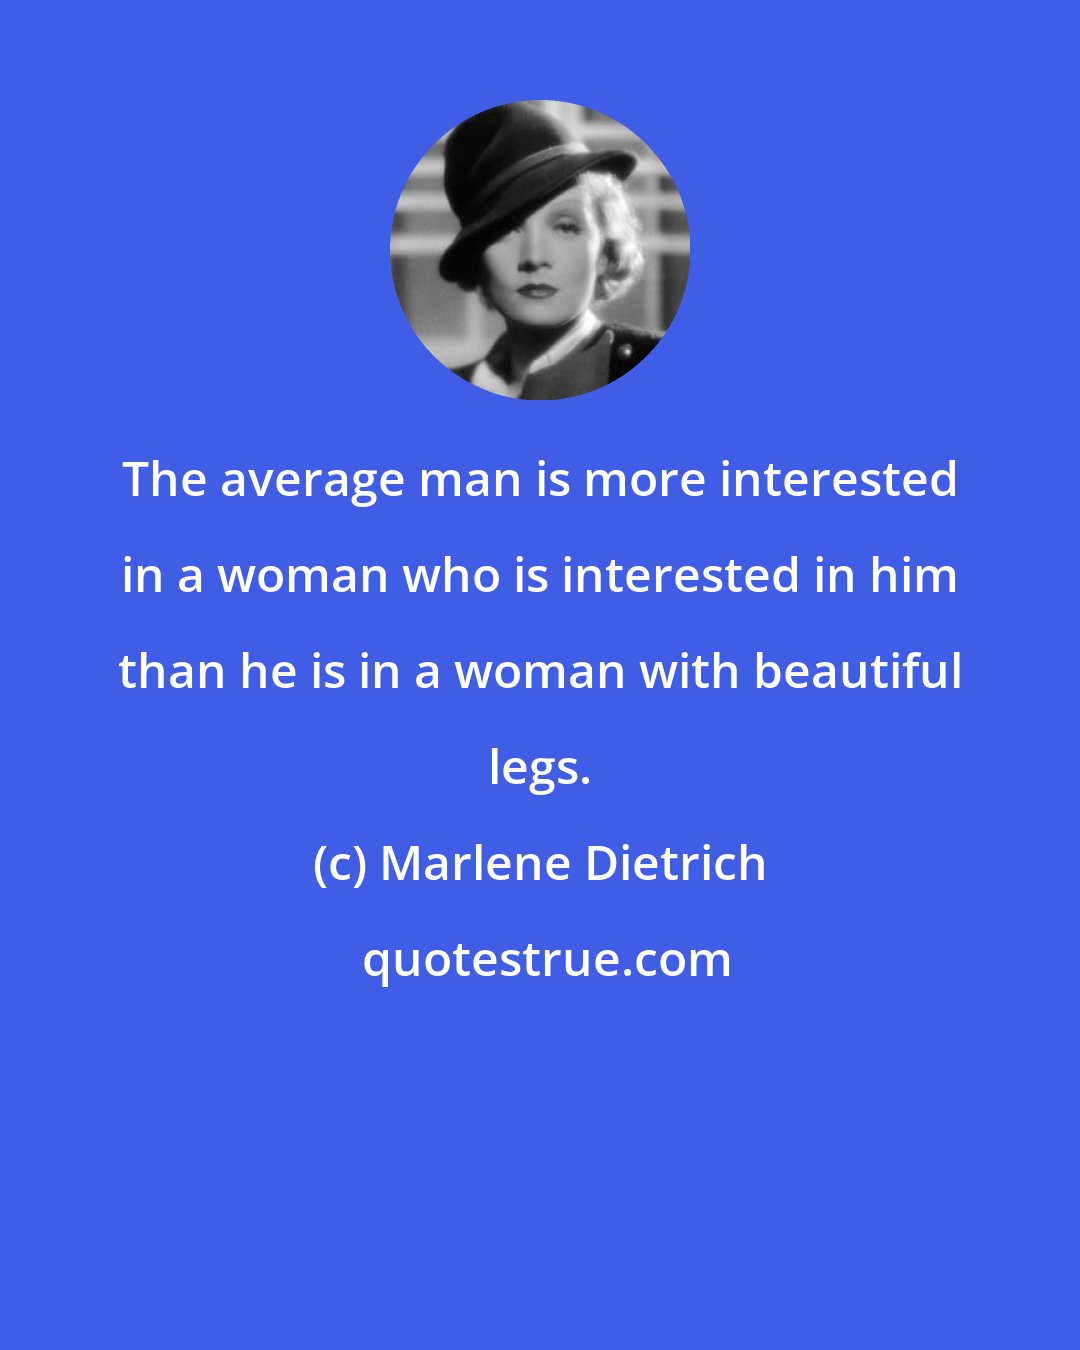 Marlene Dietrich: The average man is more interested in a woman who is interested in him than he is in a woman with beautiful legs.